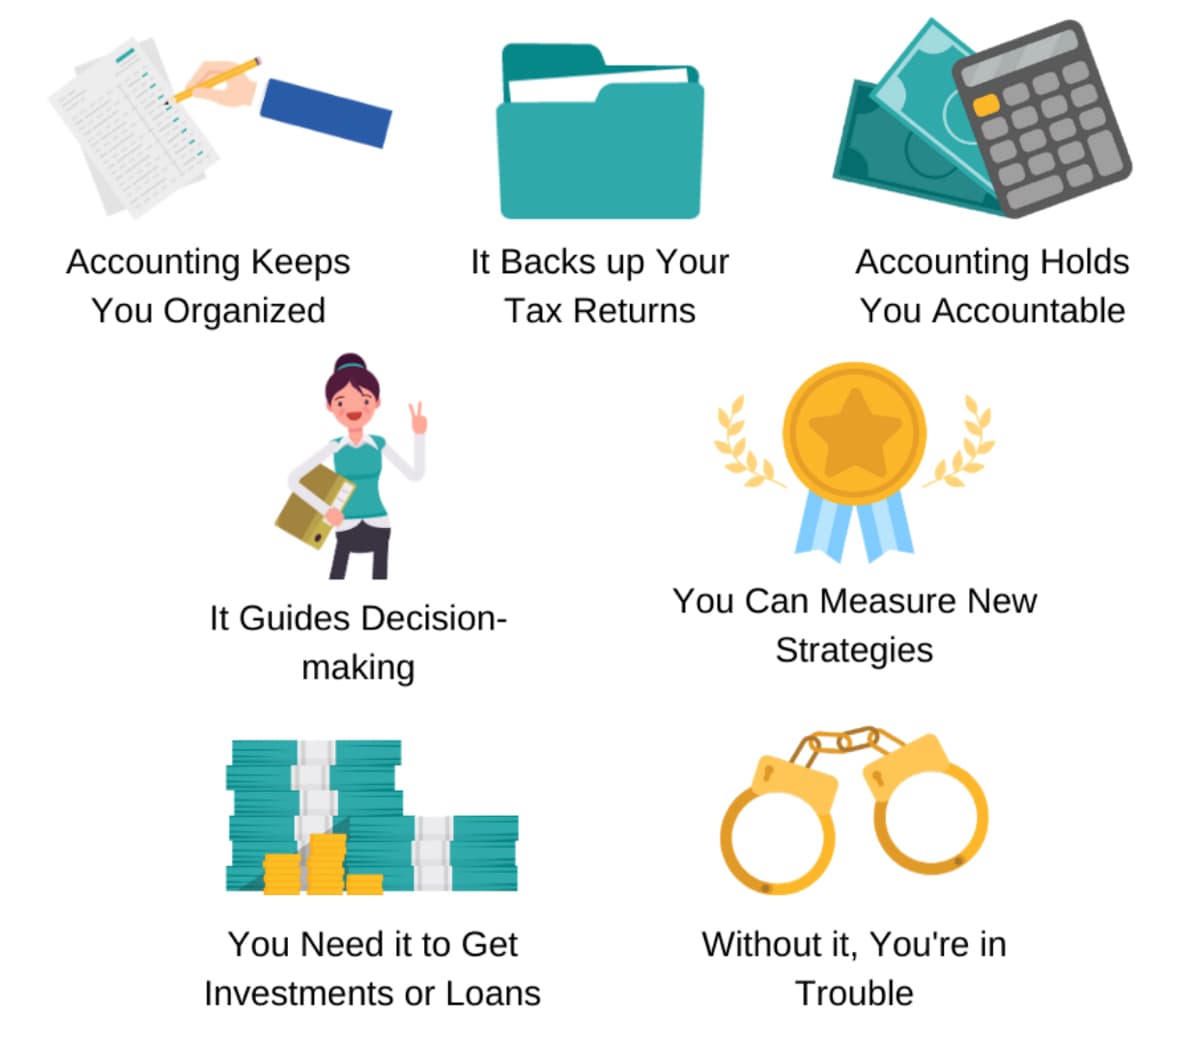 It Backs up Your
Accounting Keeps
You Organized
Accounting Holds
Tax Returns
You Accountable
You Can Measure New
It Guides Decision-
Strategies
making
You Need it to Get
Without it, You're in
Investments or Loans
Trouble
